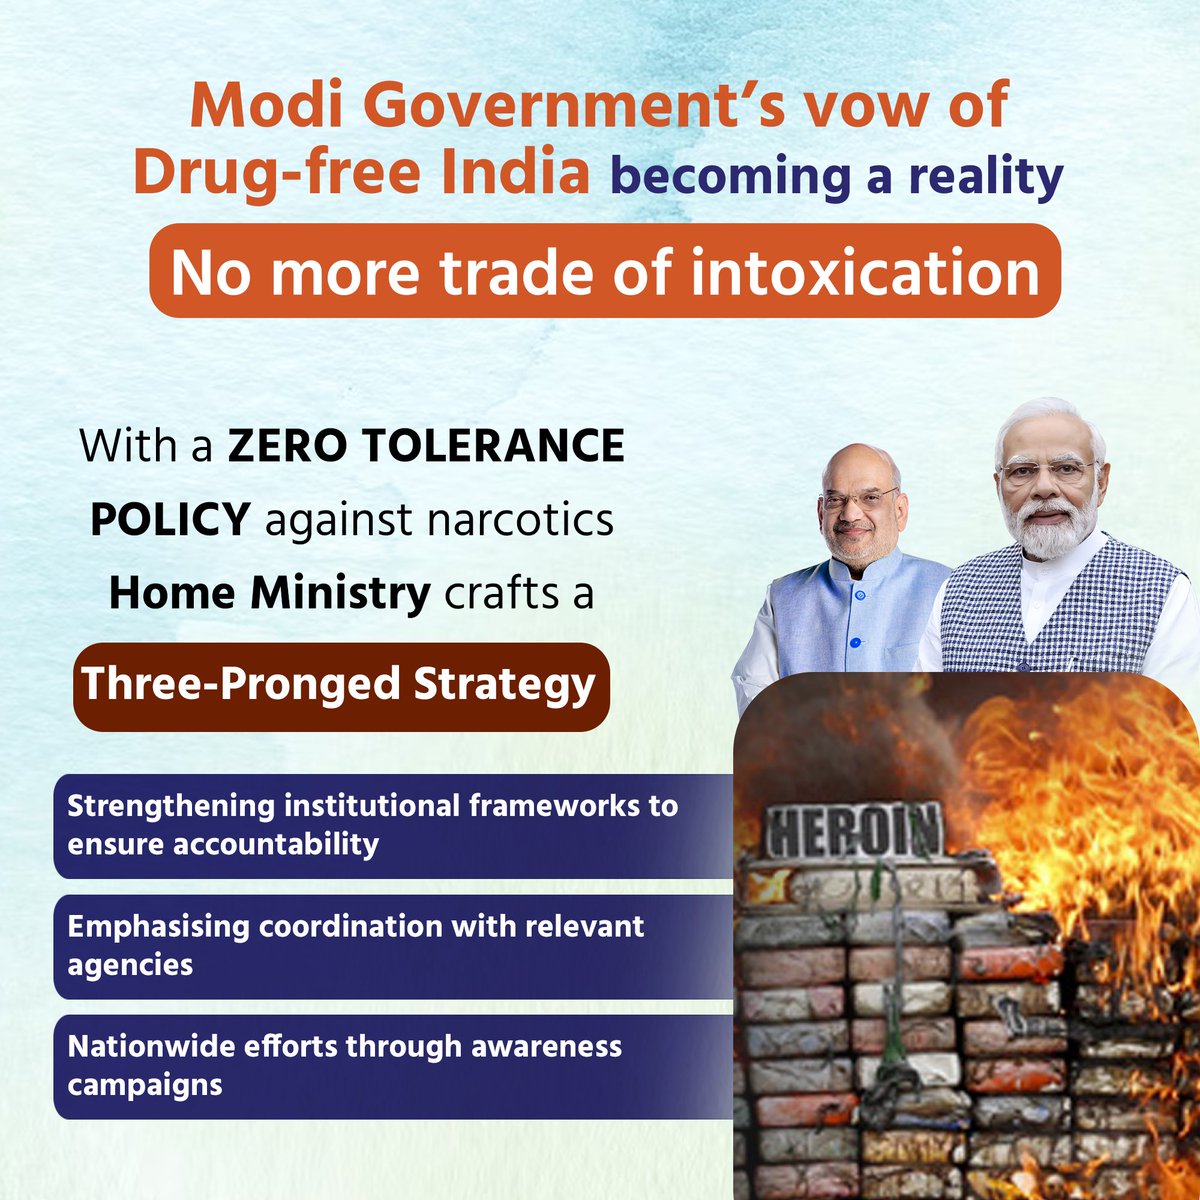 Modi govt's vow of #DrugsFreeBharat becoming a reality.